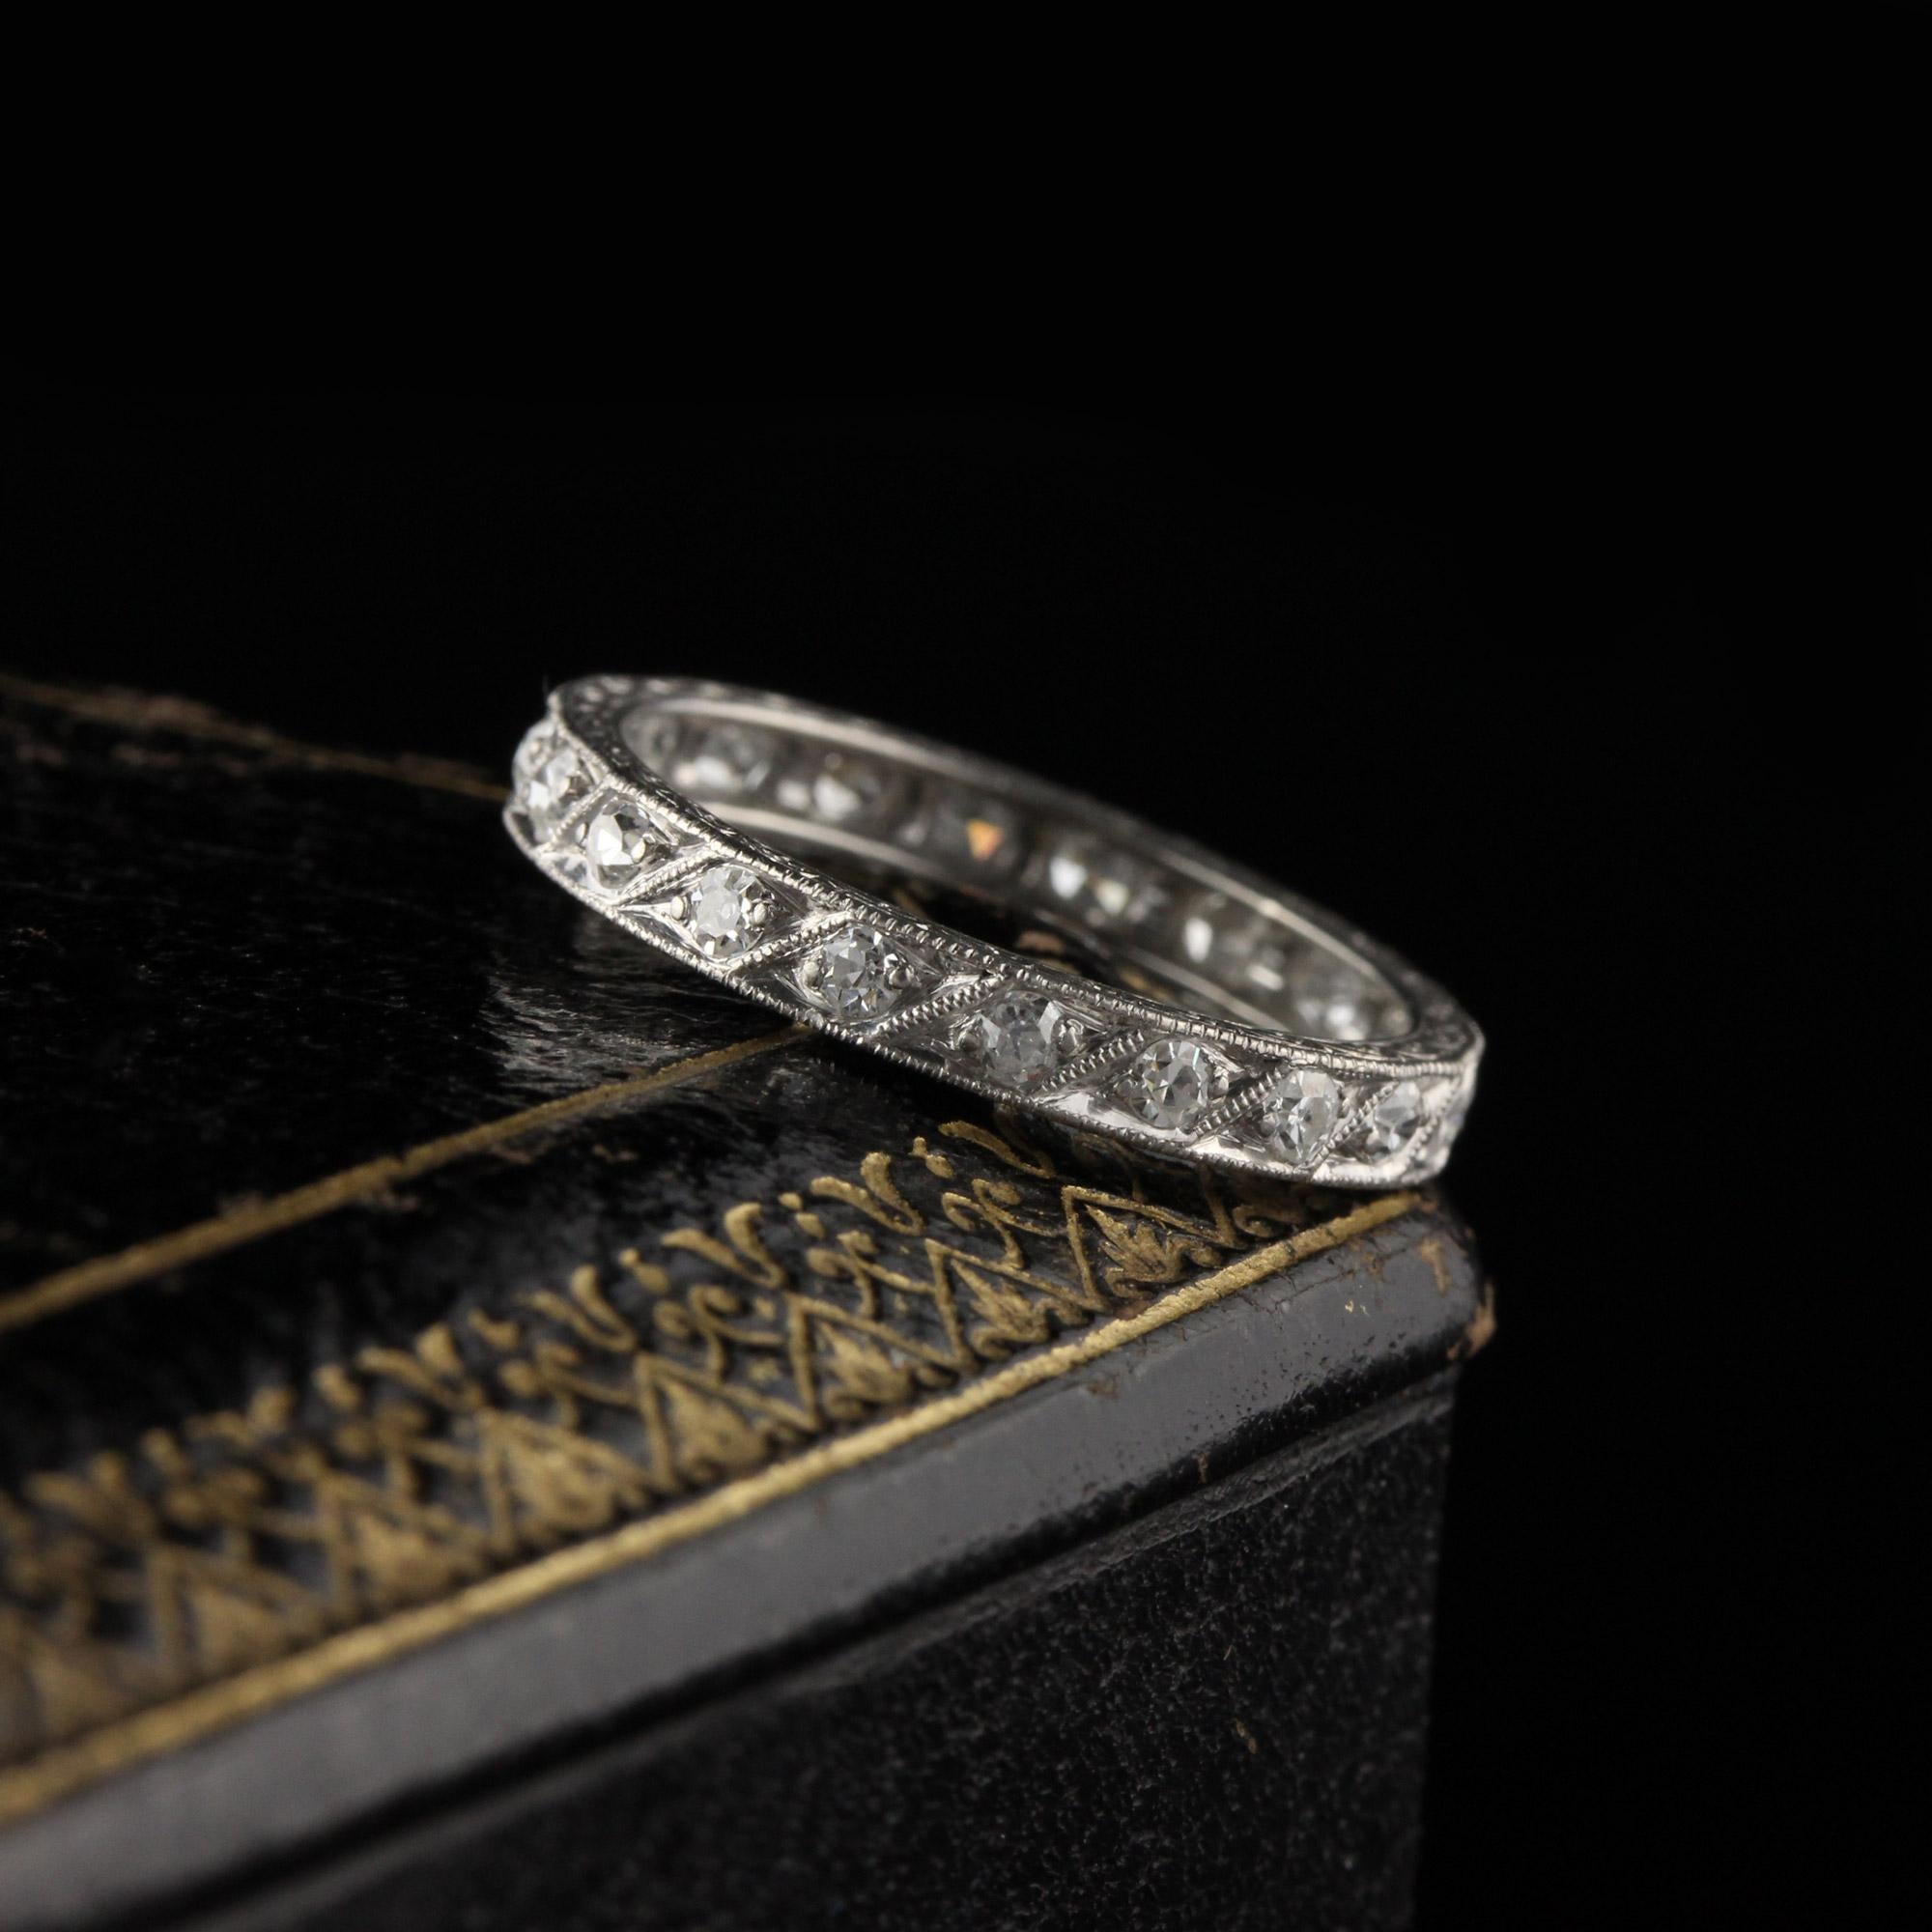 Stunning Art Deco platinum diamond eternity band with beautiful engravings on the side of the band. 

#R0422

Metal: Platinum

Weight: 2.1 Grams

Total Diamond Weight: Approximately 0.80 CTS

Diamond Color: H

Diamond Clarity: VS2 - SI1

Ring Size: